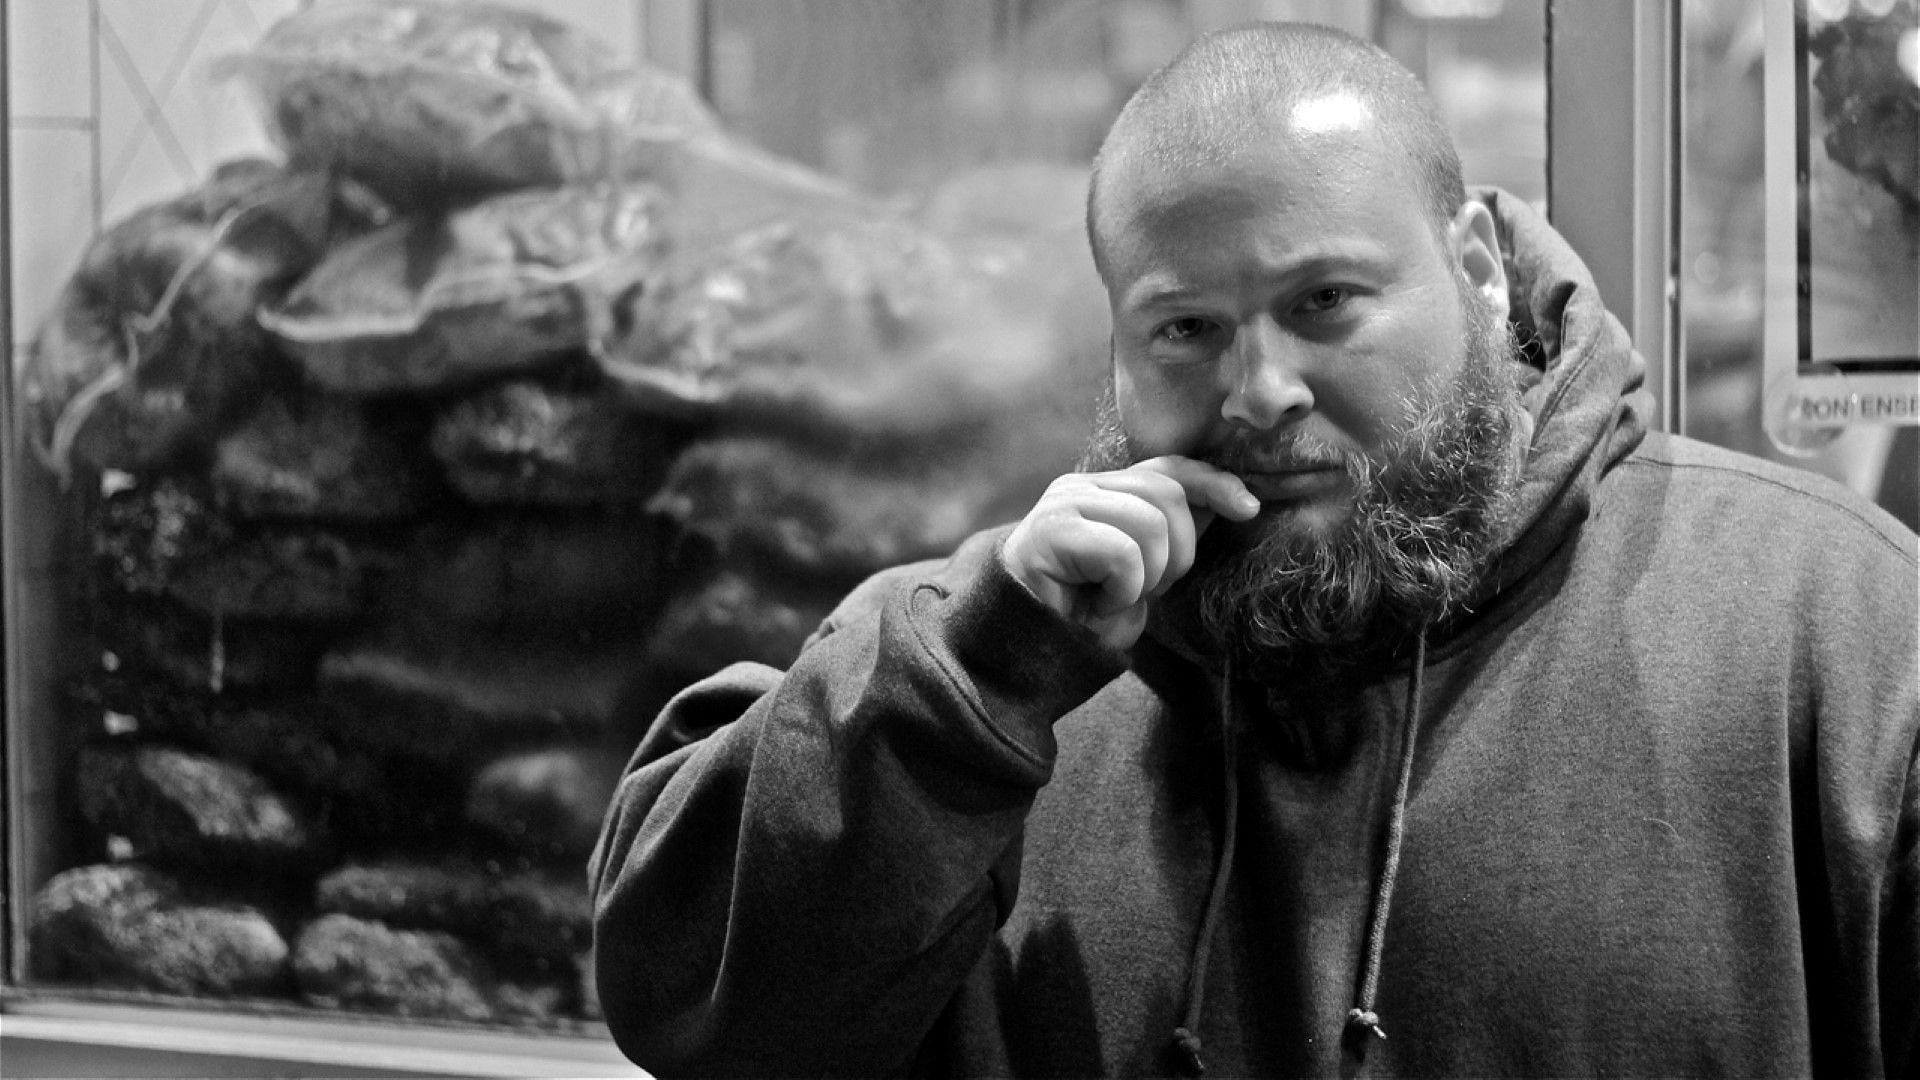 The story behind Action Bronson